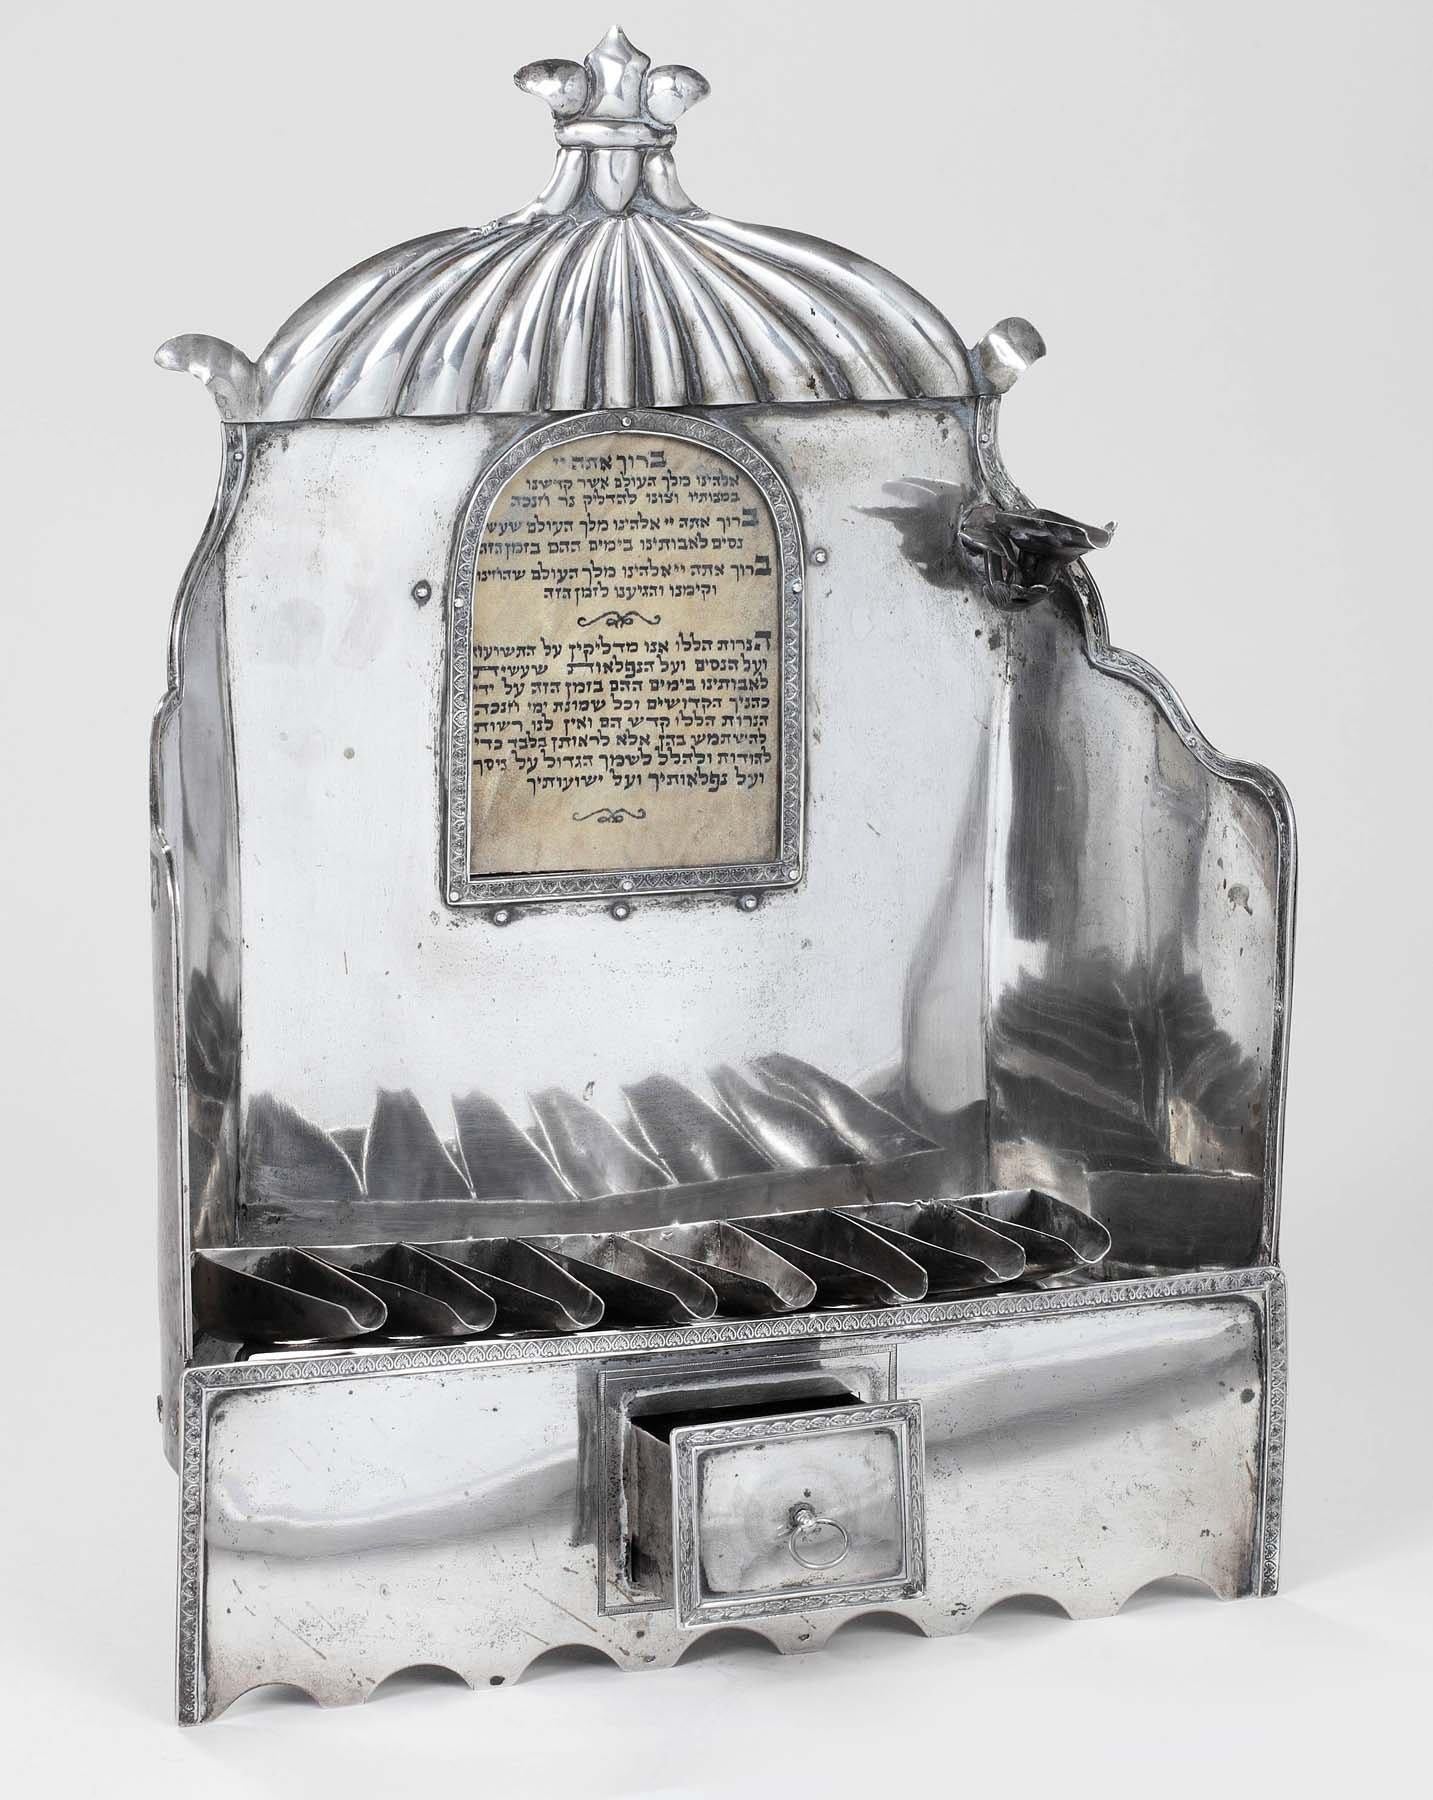 This large silver Hanukkah lamp features a canopy at top, with a cut-out window below where a piece of parchment could be inserted that would have the blessings of Hanukkah inscribed on it (the parchment is a later replacement). Row of oil fonts